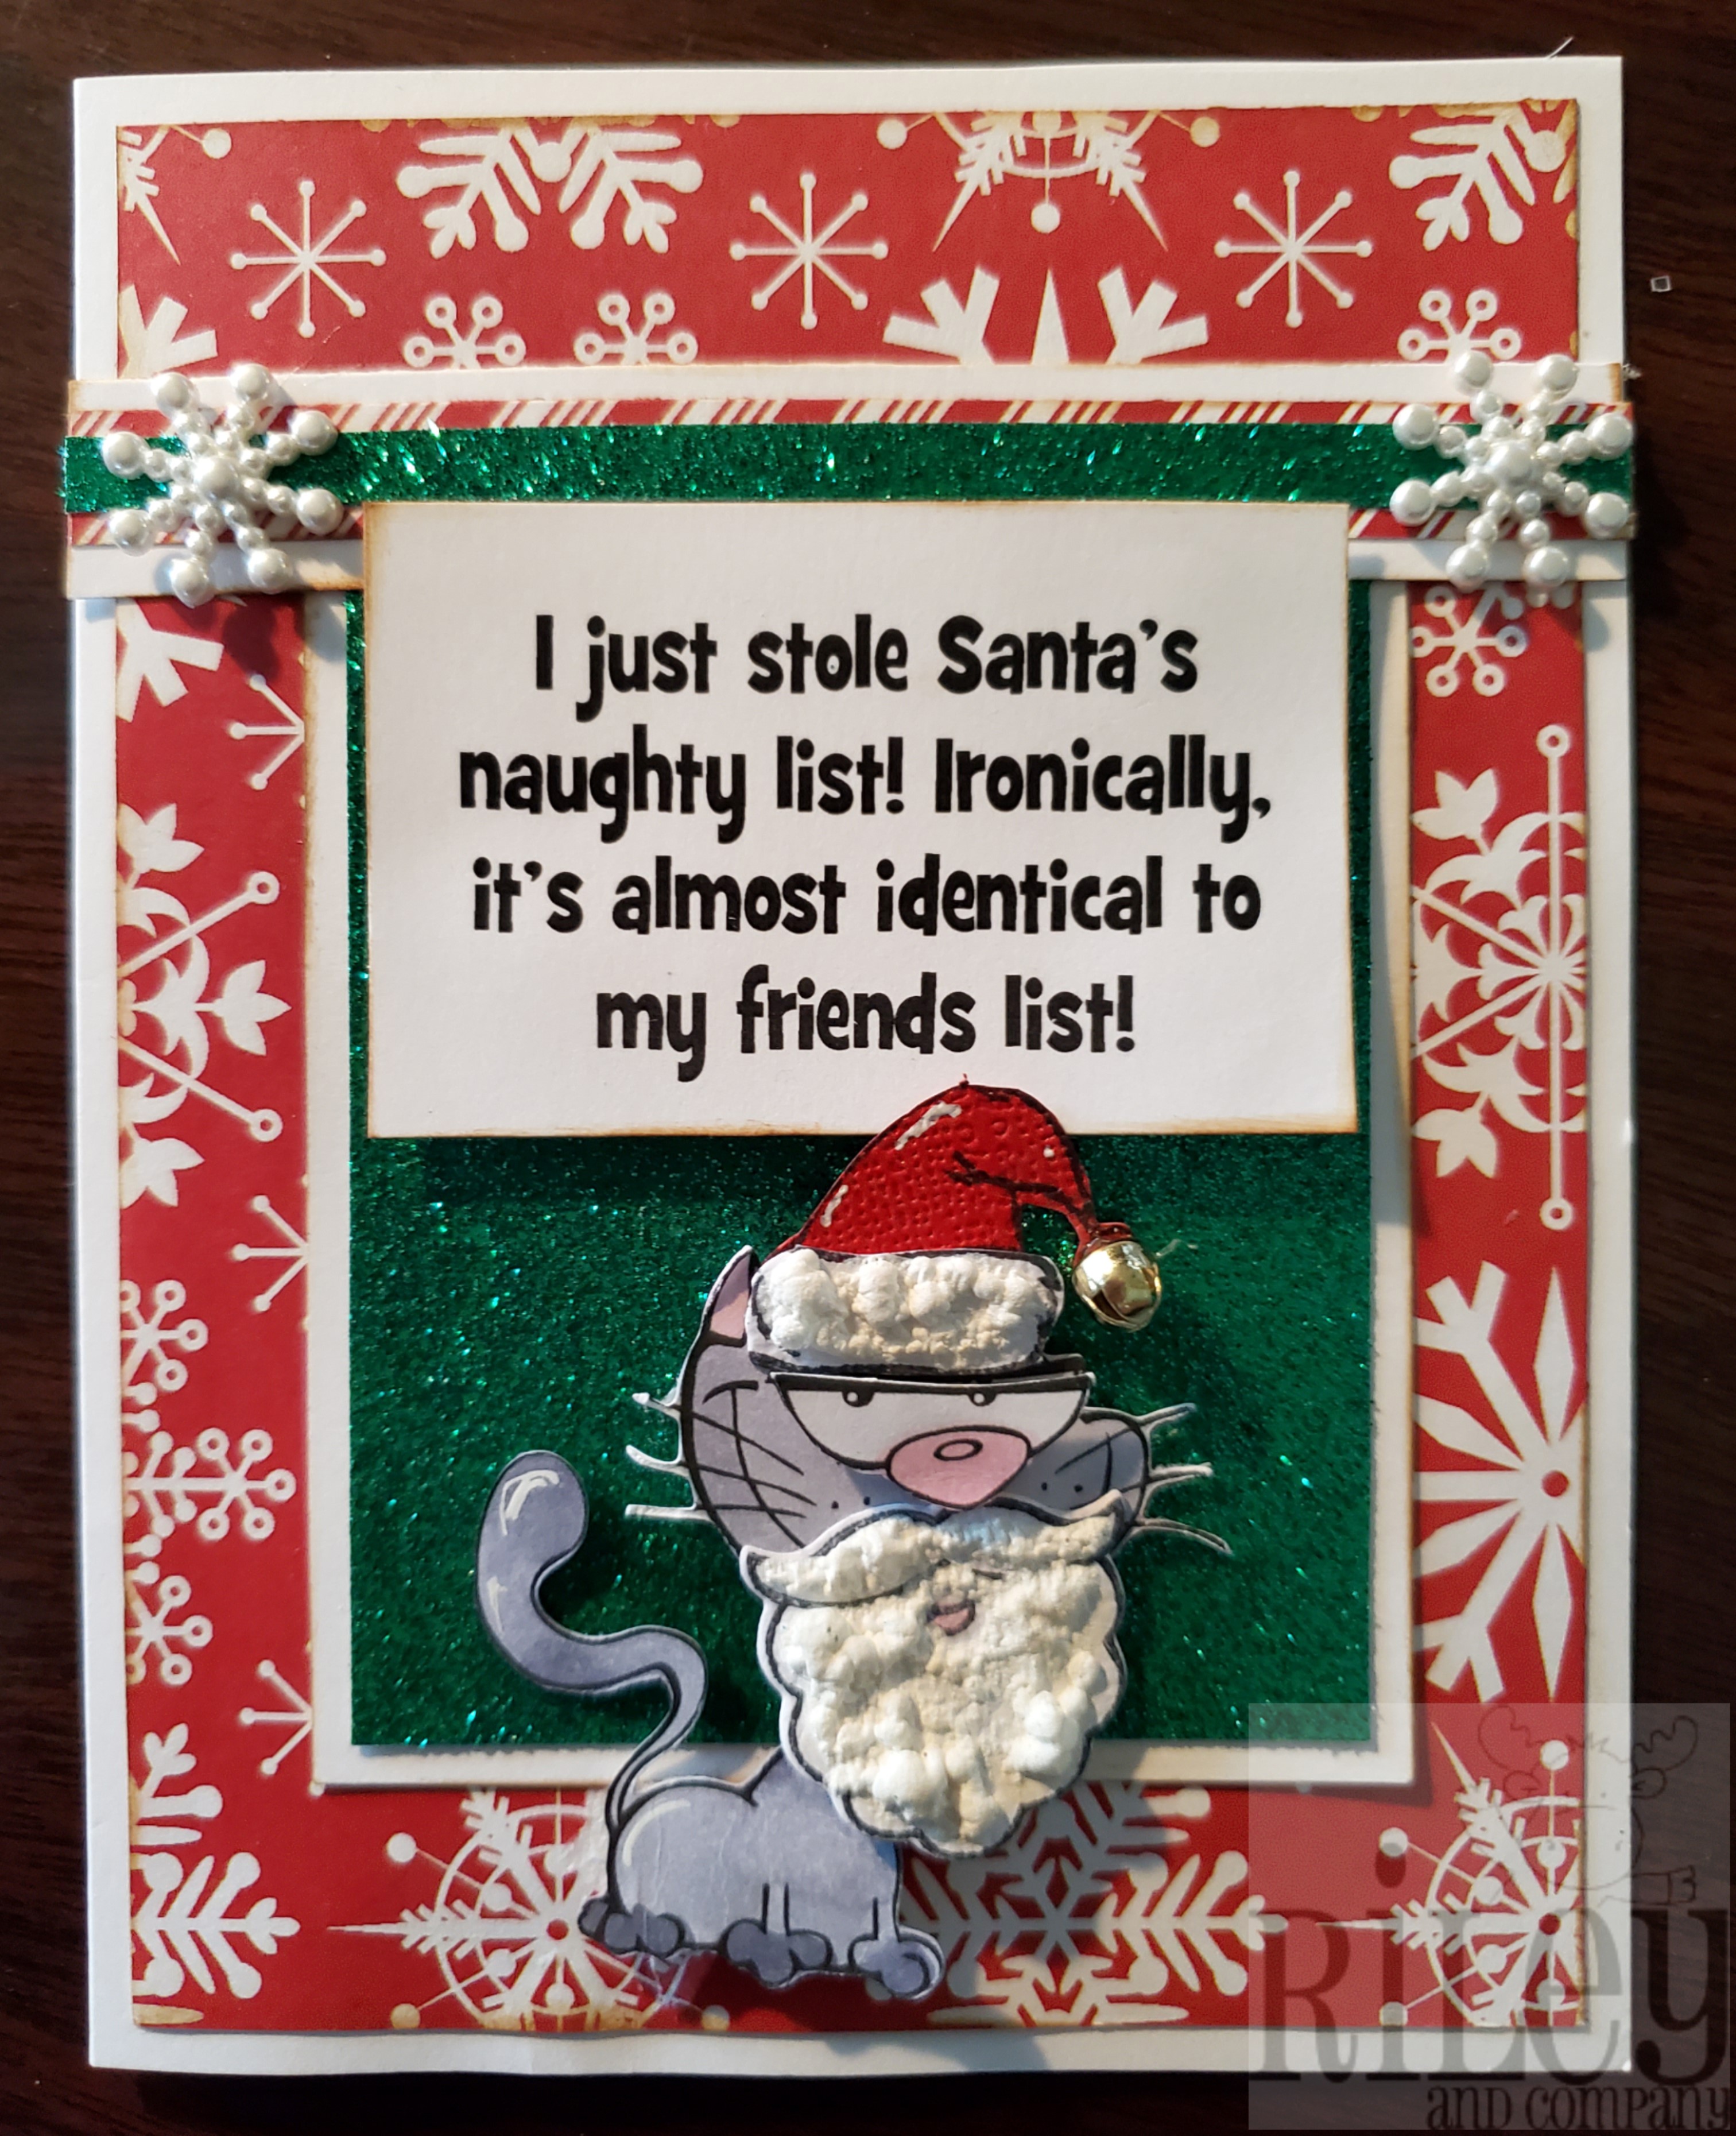 Santa's Nice or Naughty List Personalized Tea Towels – A Gift